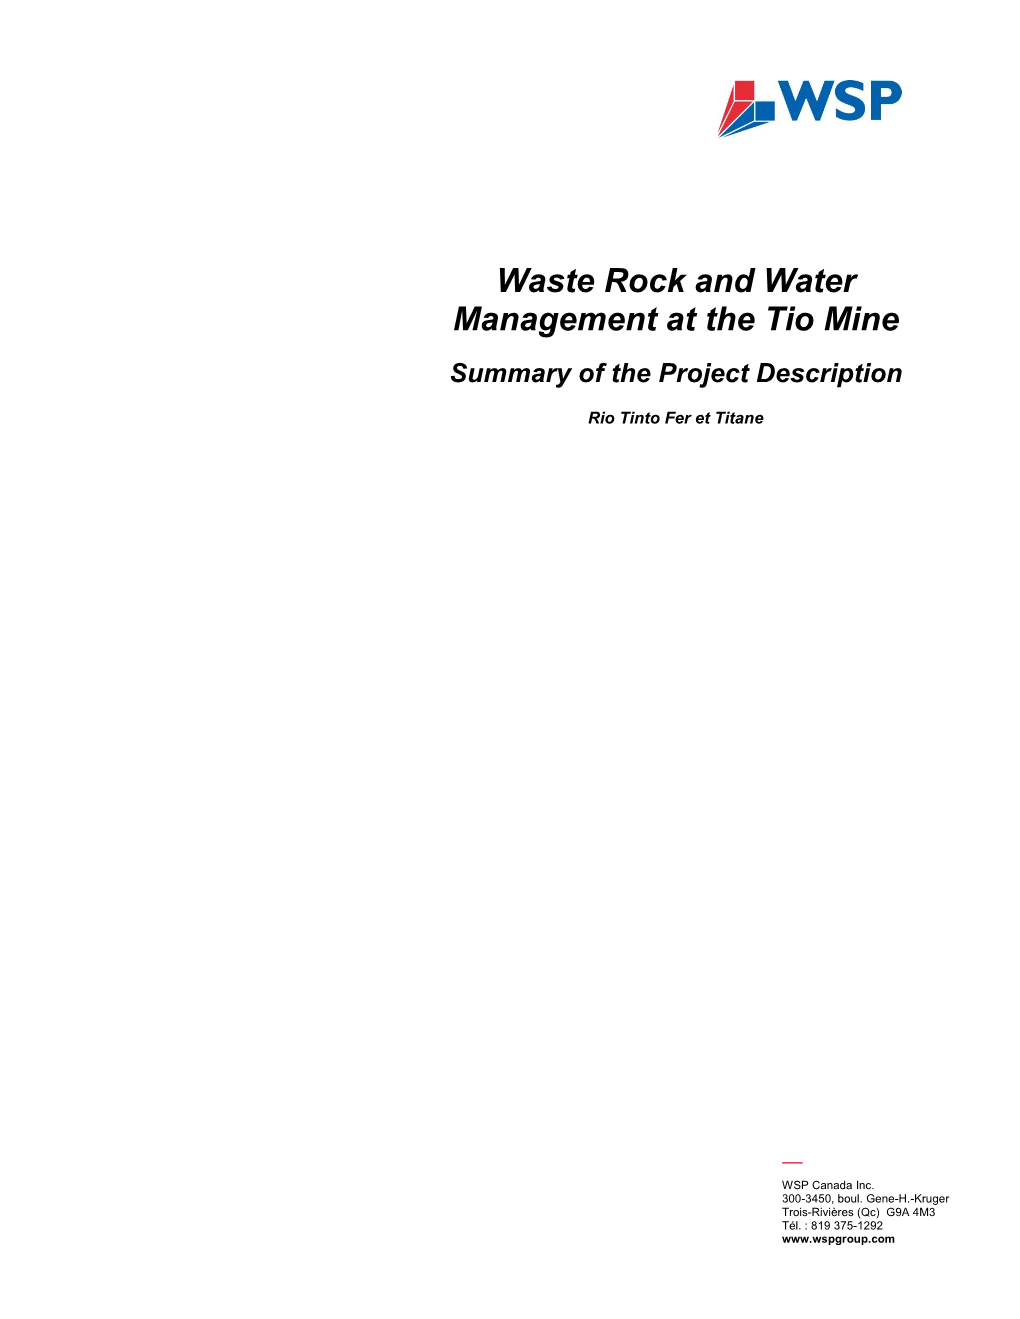 Waste Rock and Water Management at the Tio Mine Summary of the Project Description